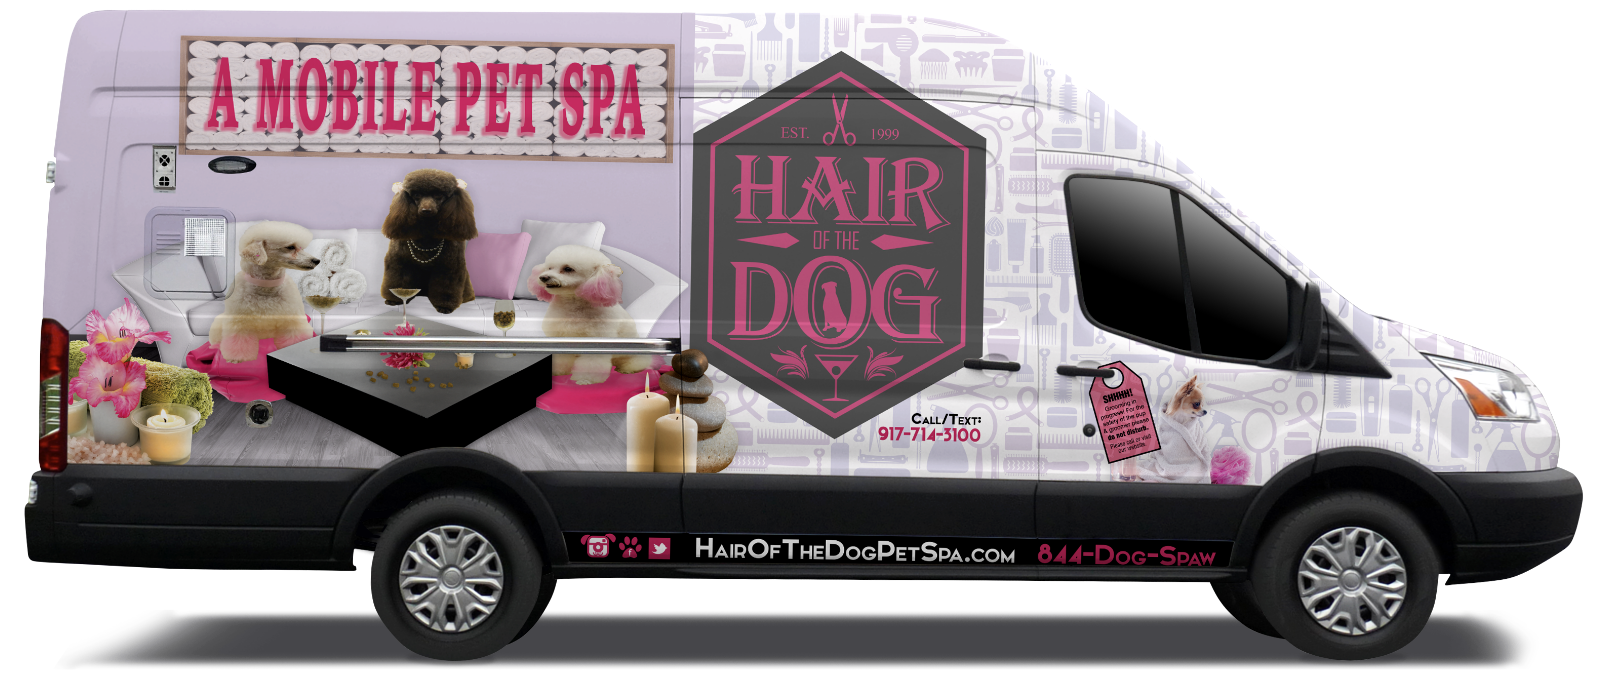 Hair of the Dog – Welcome to Hair of the Dog